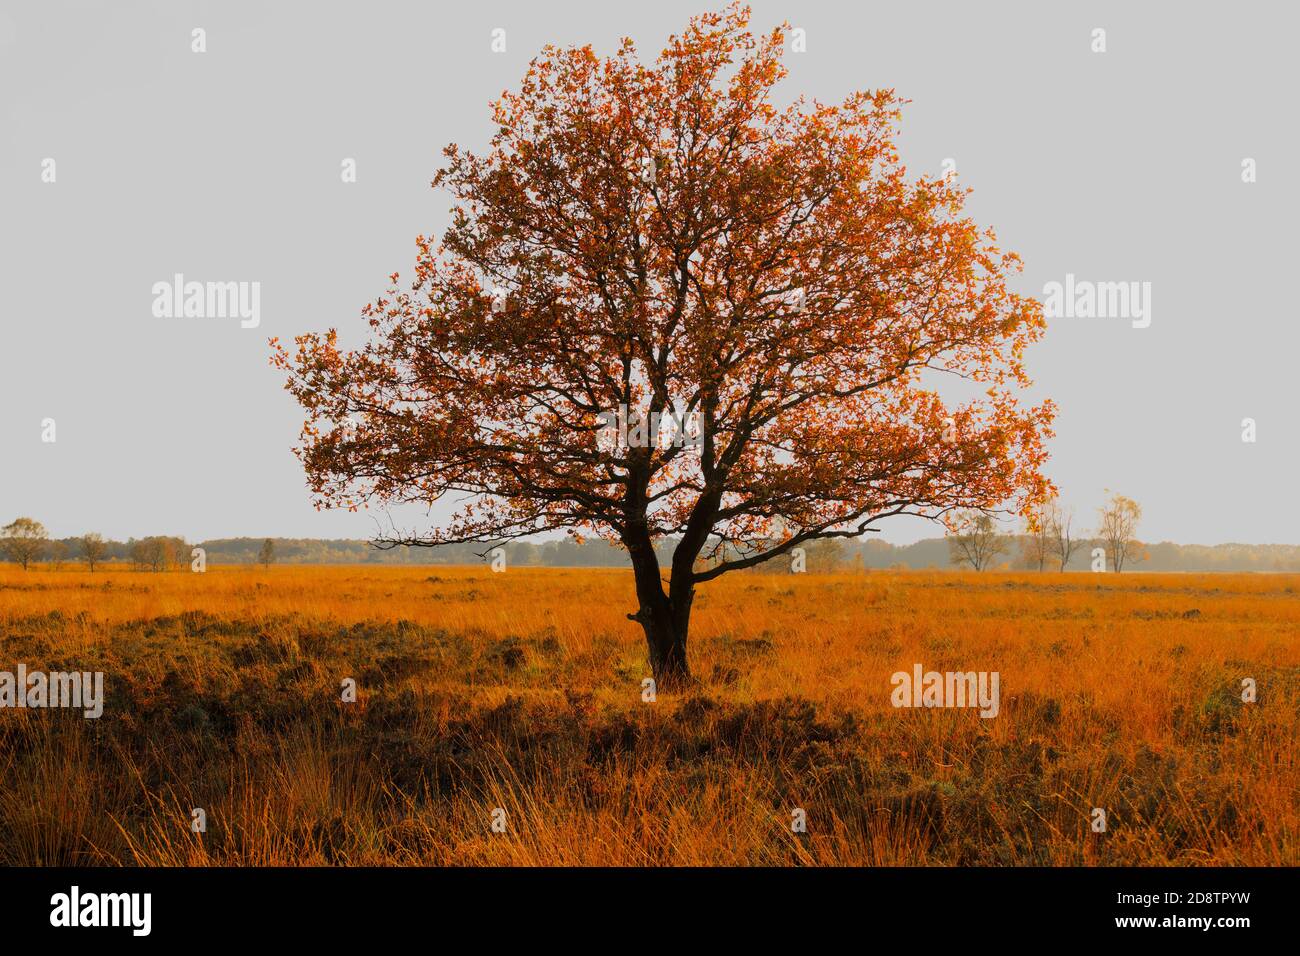 Lone tree in field in autumn.  Red and orange leaves, blue sky. Horizontal composition, full frame. Stock Photo